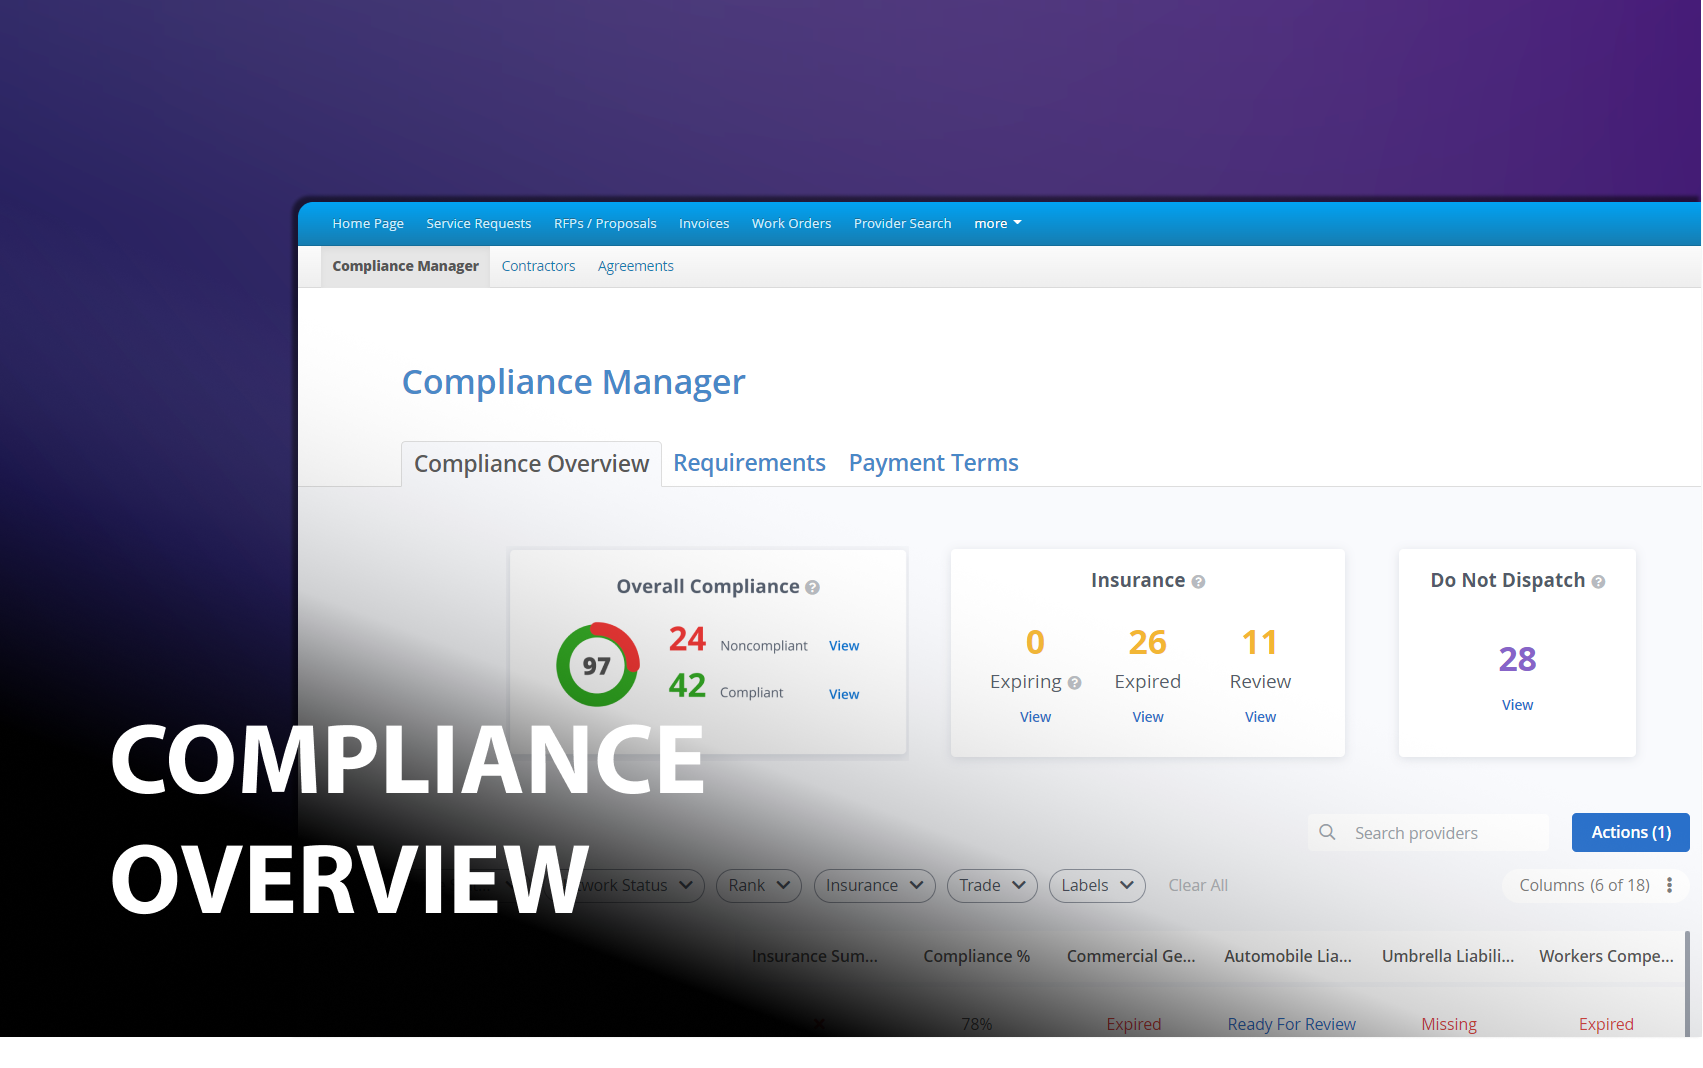 Picture showing compliance overview